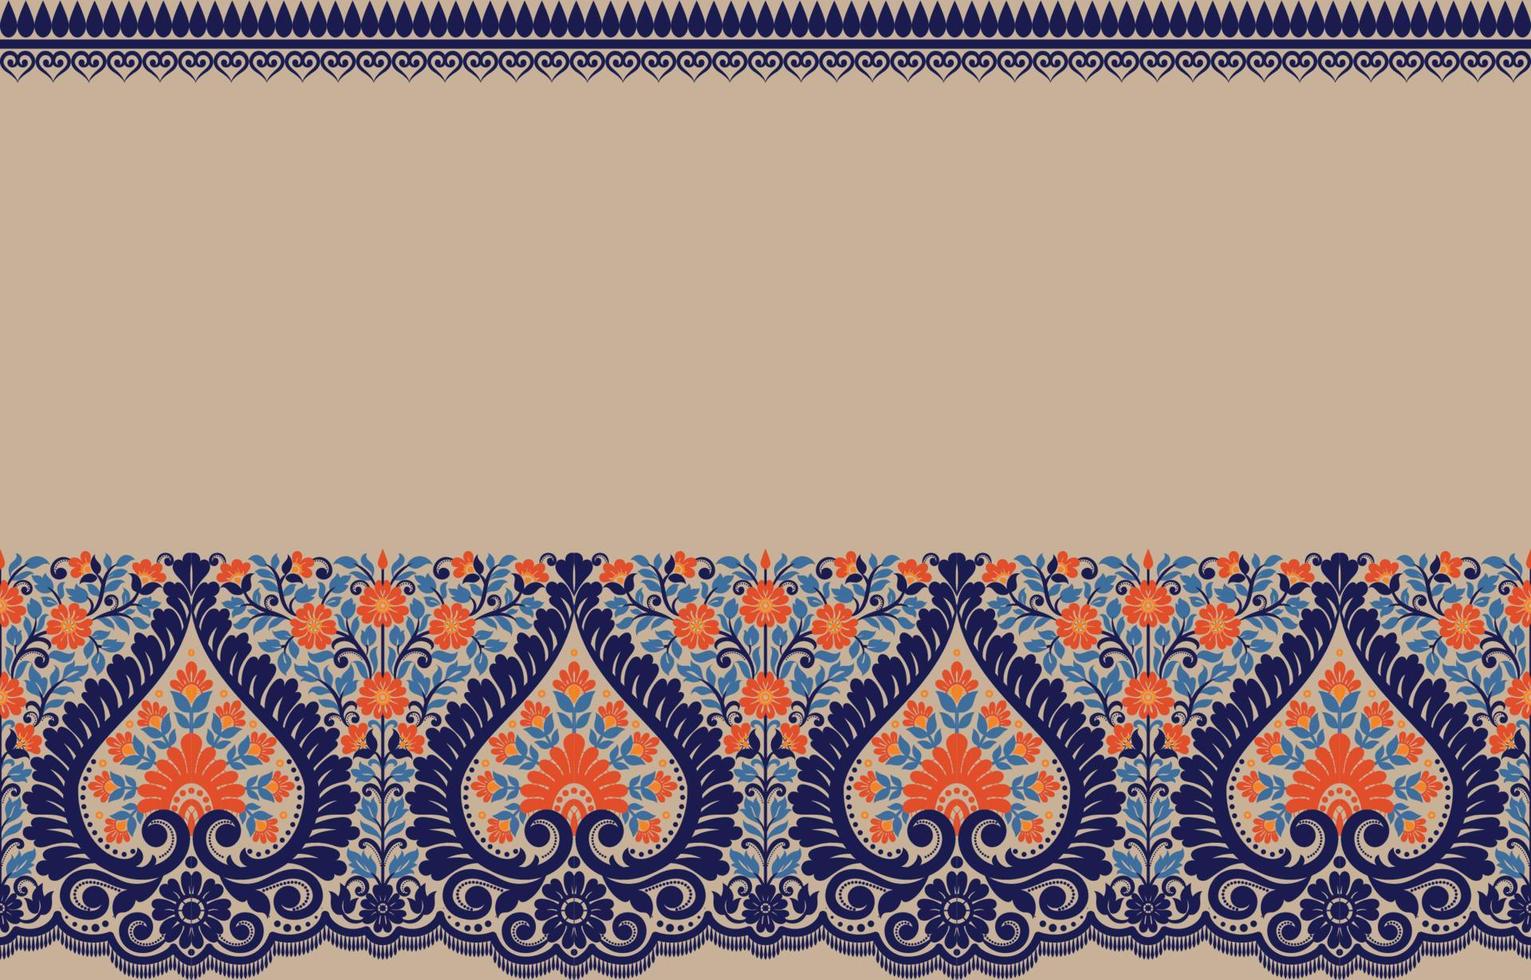 Abstract ethnic geometric pattern design background for wallpaper or other fabric pattern. vector